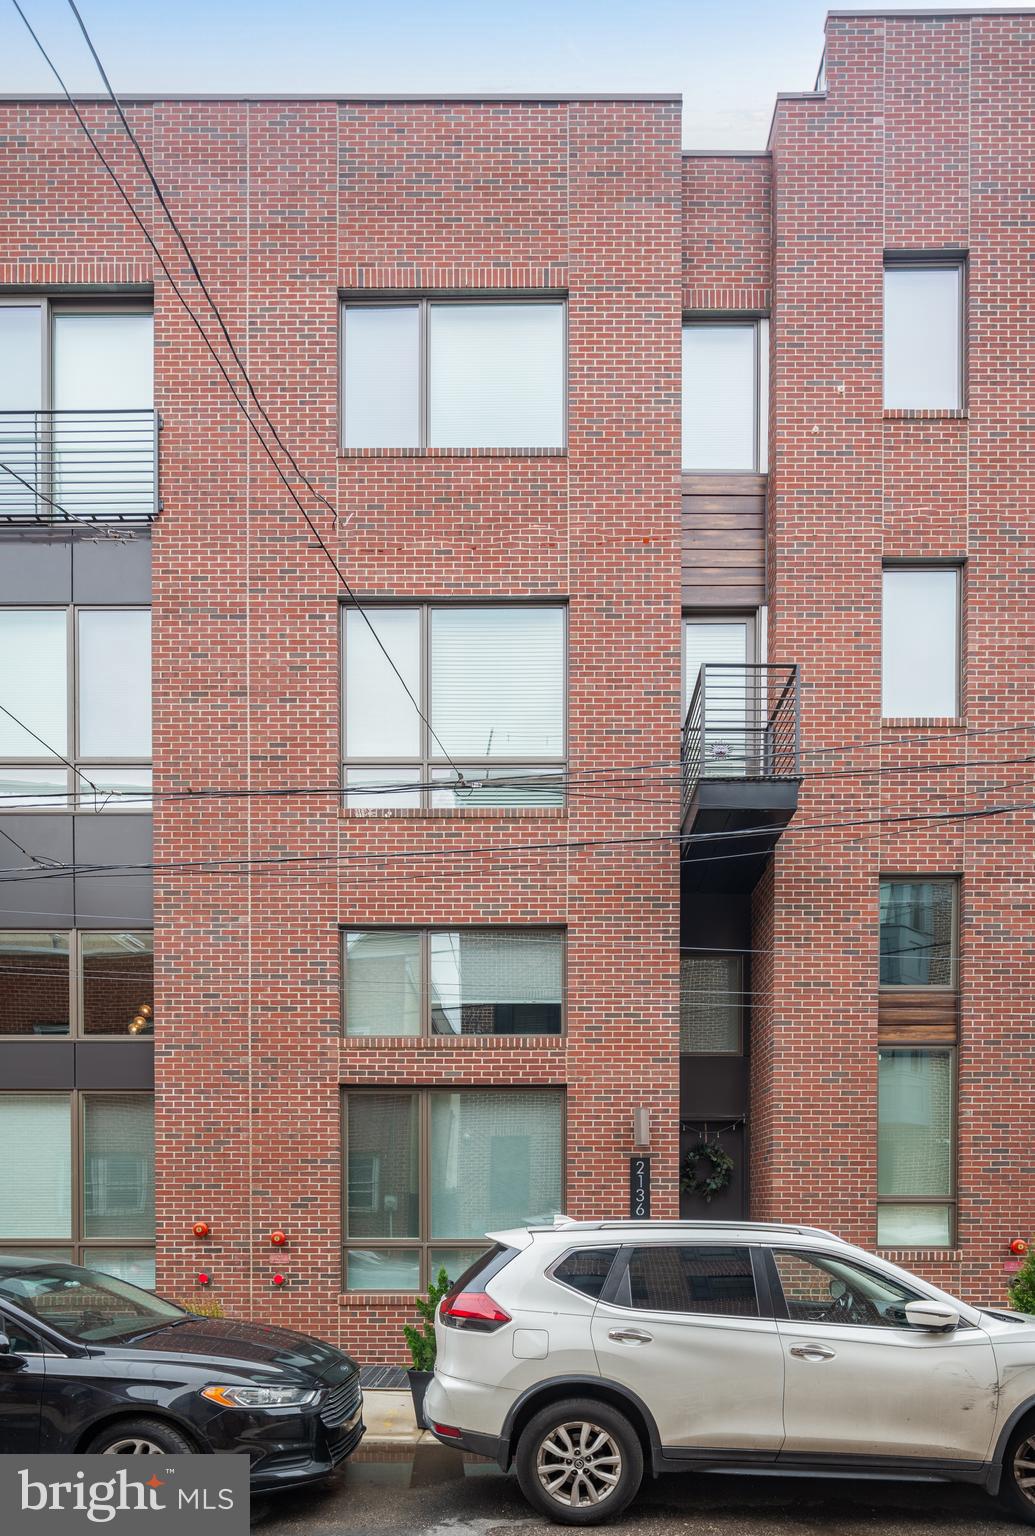 a car parked in front of a building